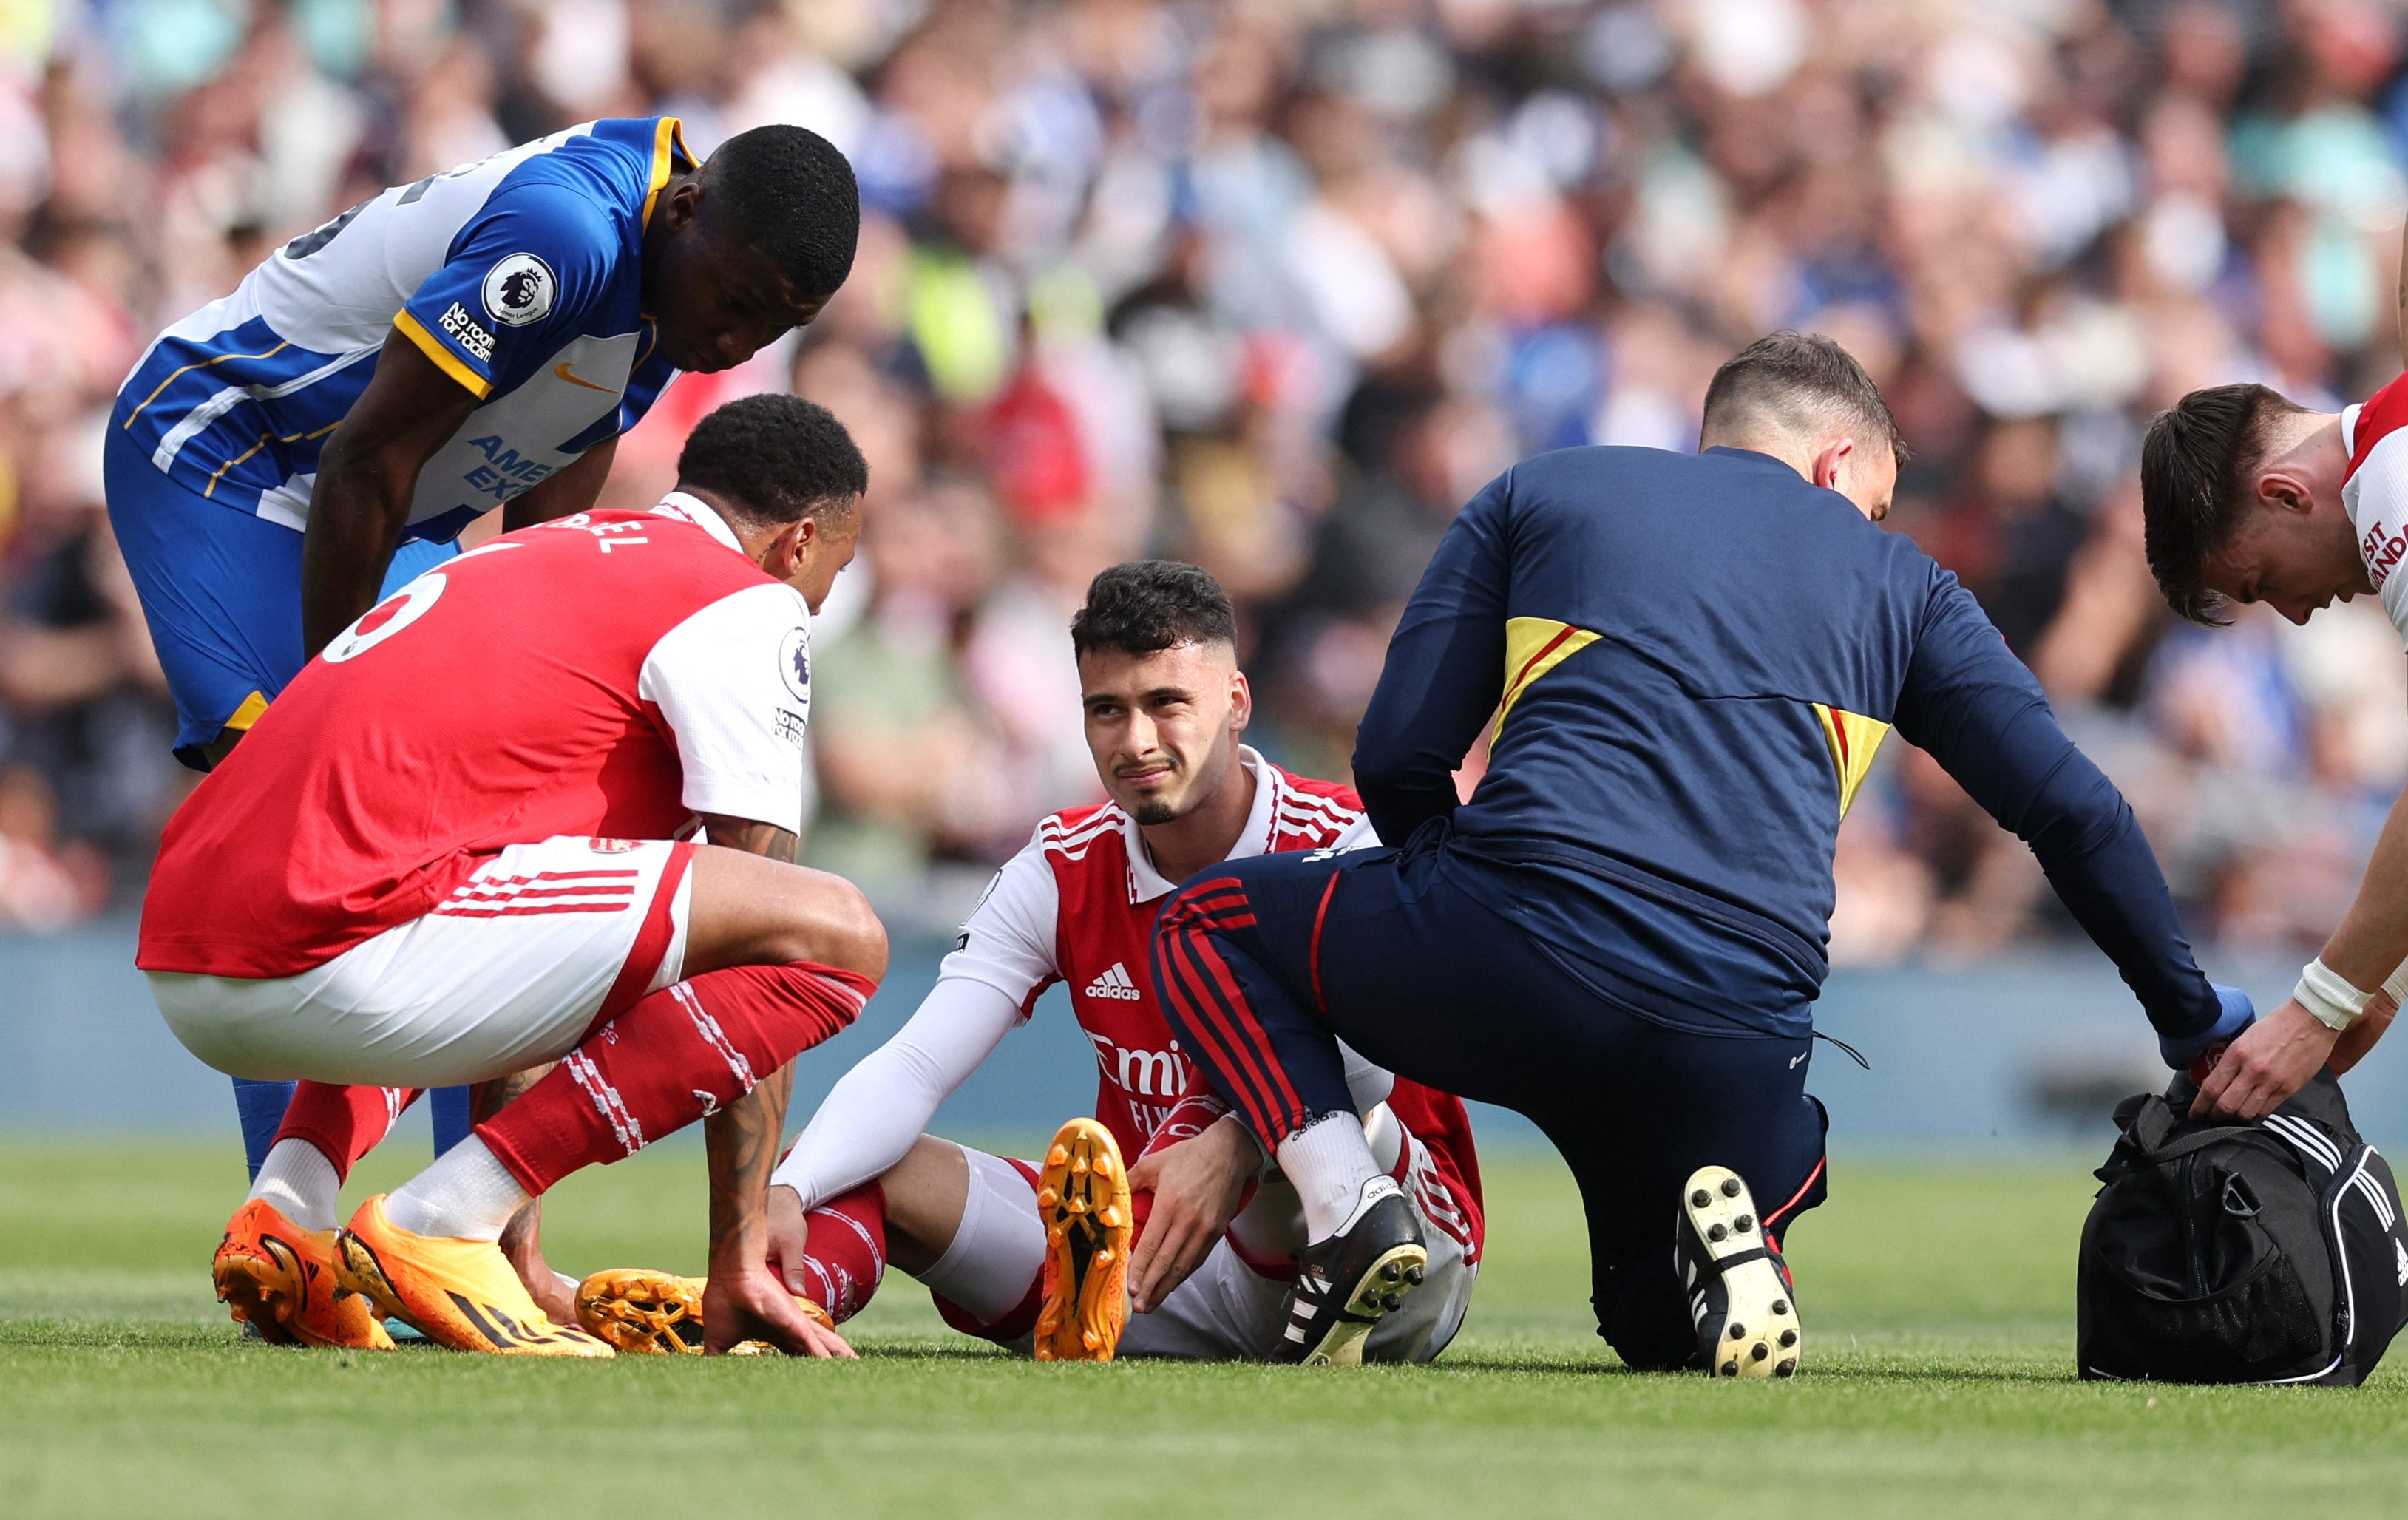 Gabriel Martinelli went off injured on a dismal day for Arsenal